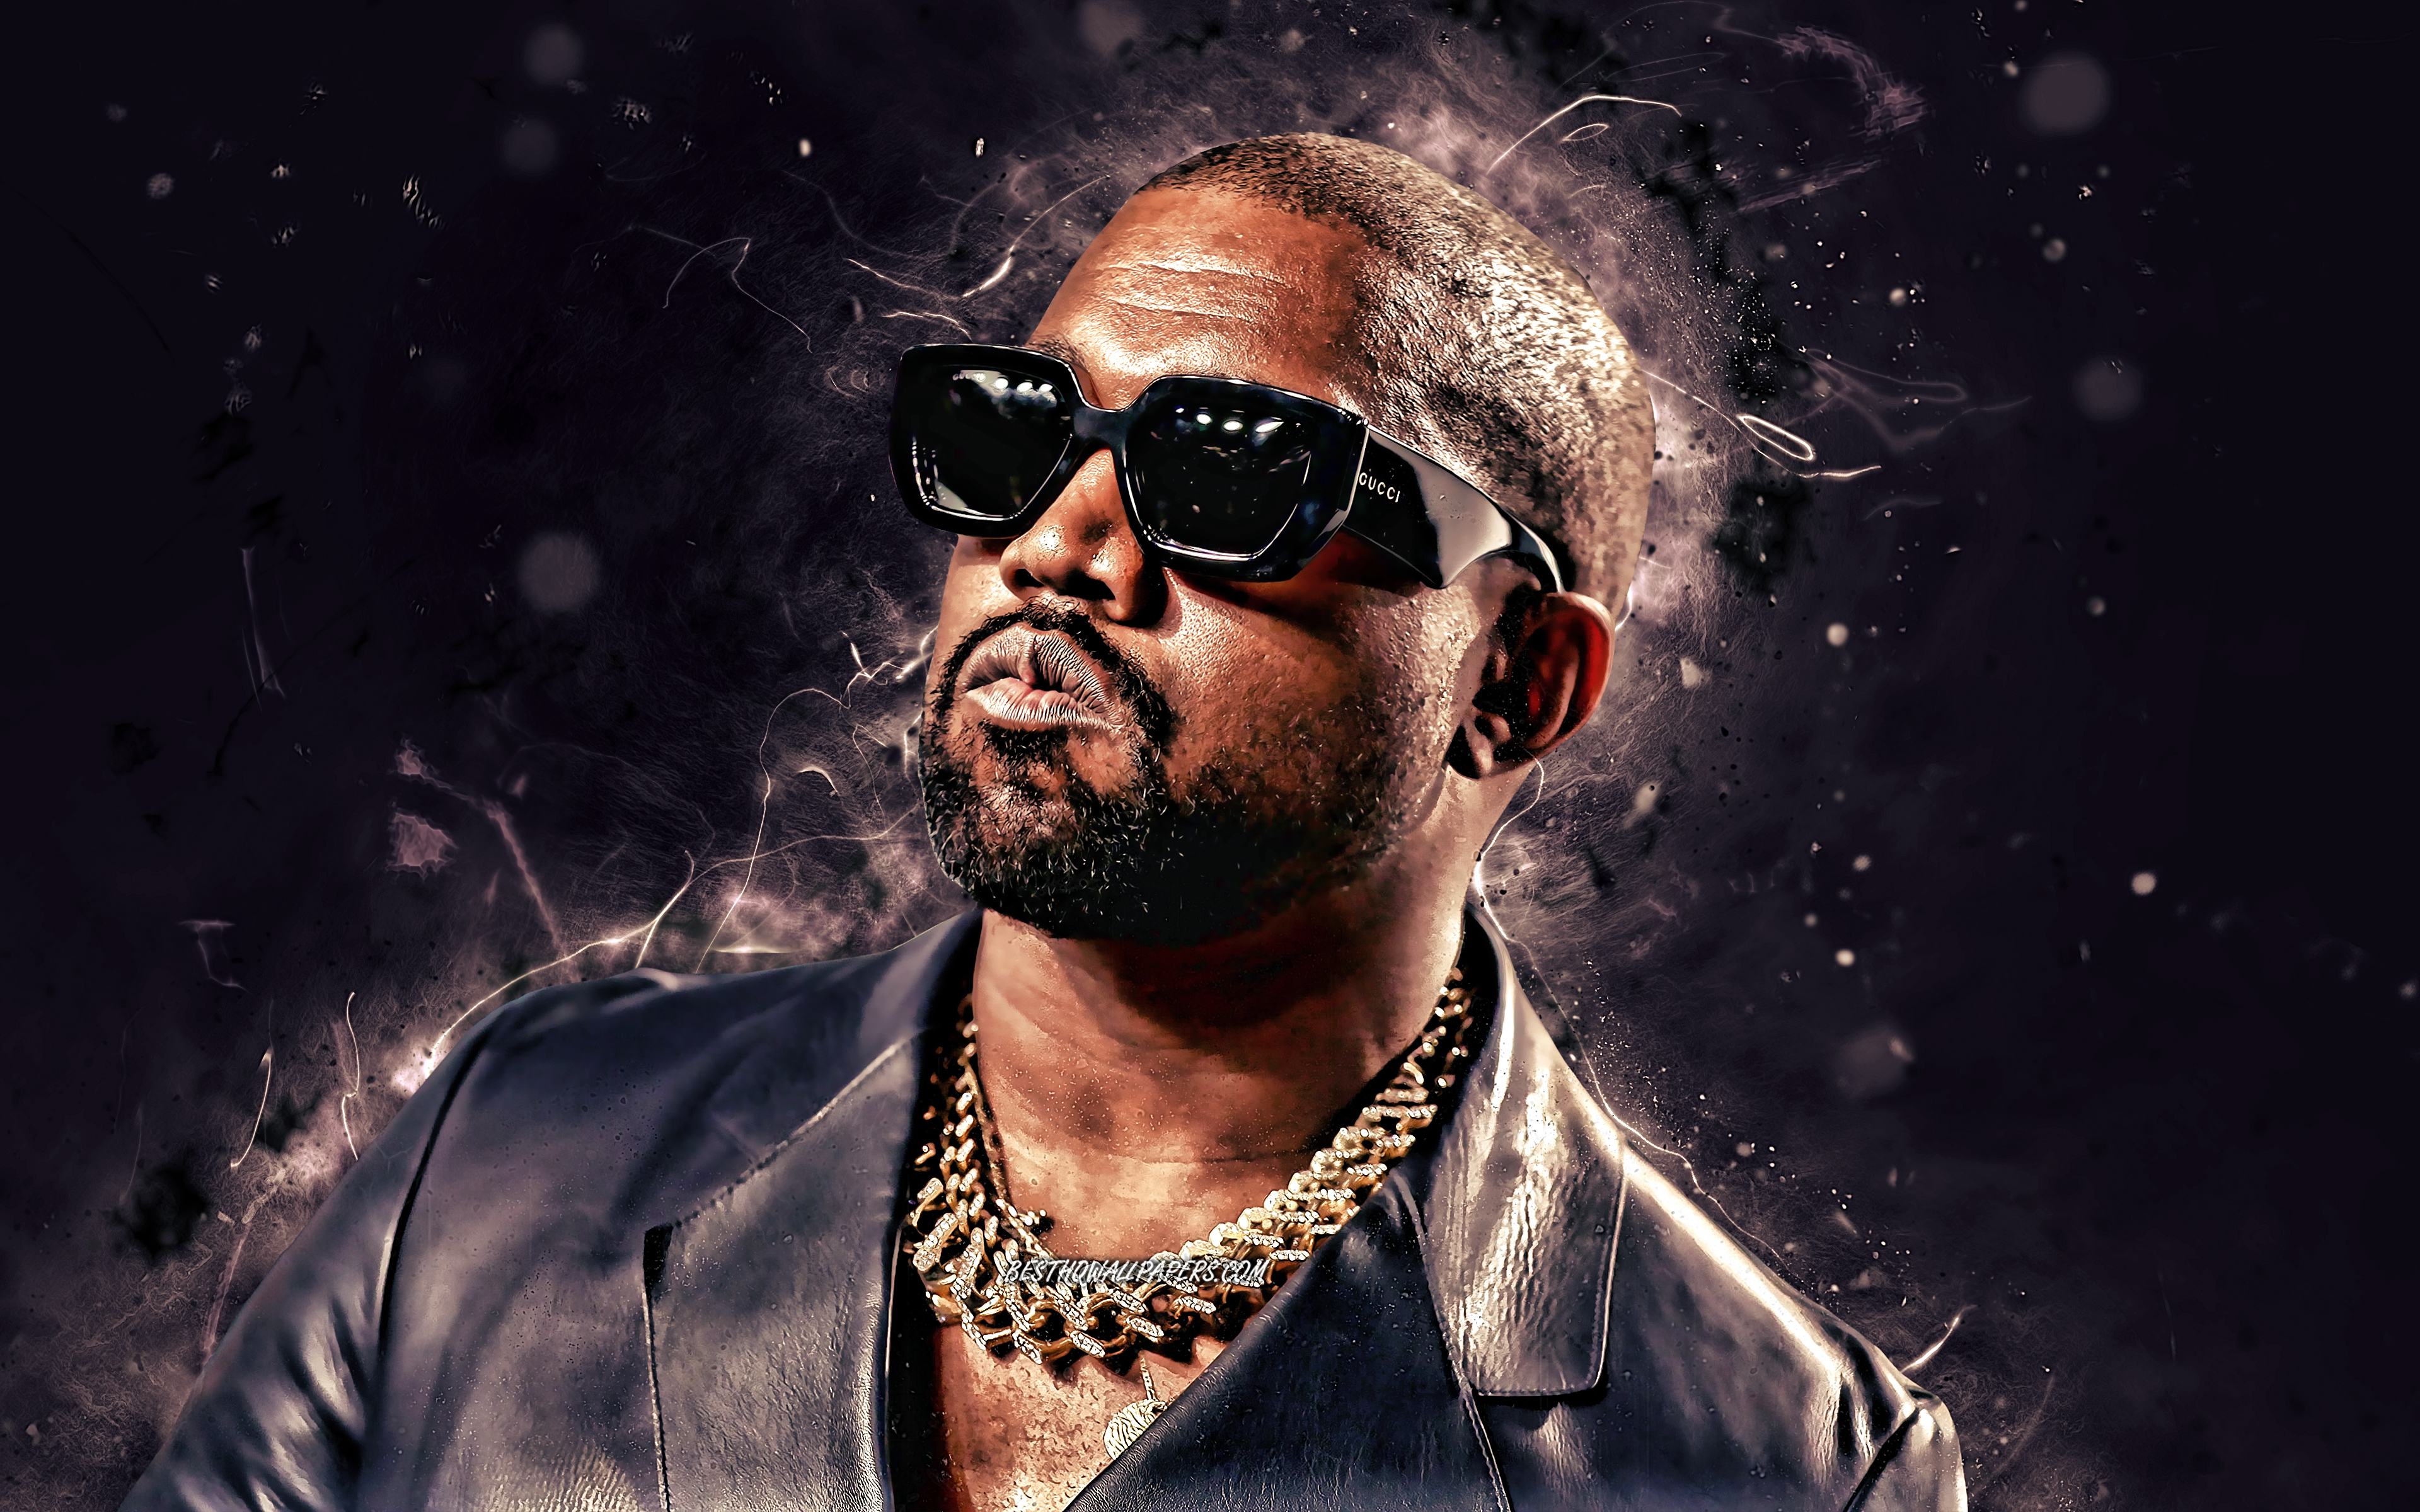 Download wallpaper Kanye West, 4k, violet neon lights, american rapper, creative, music stars, Kanye Omari West, american celebrity, Kanye West 4K for desktop with resolution 3840x2400. High Quality HD picture wallpaper